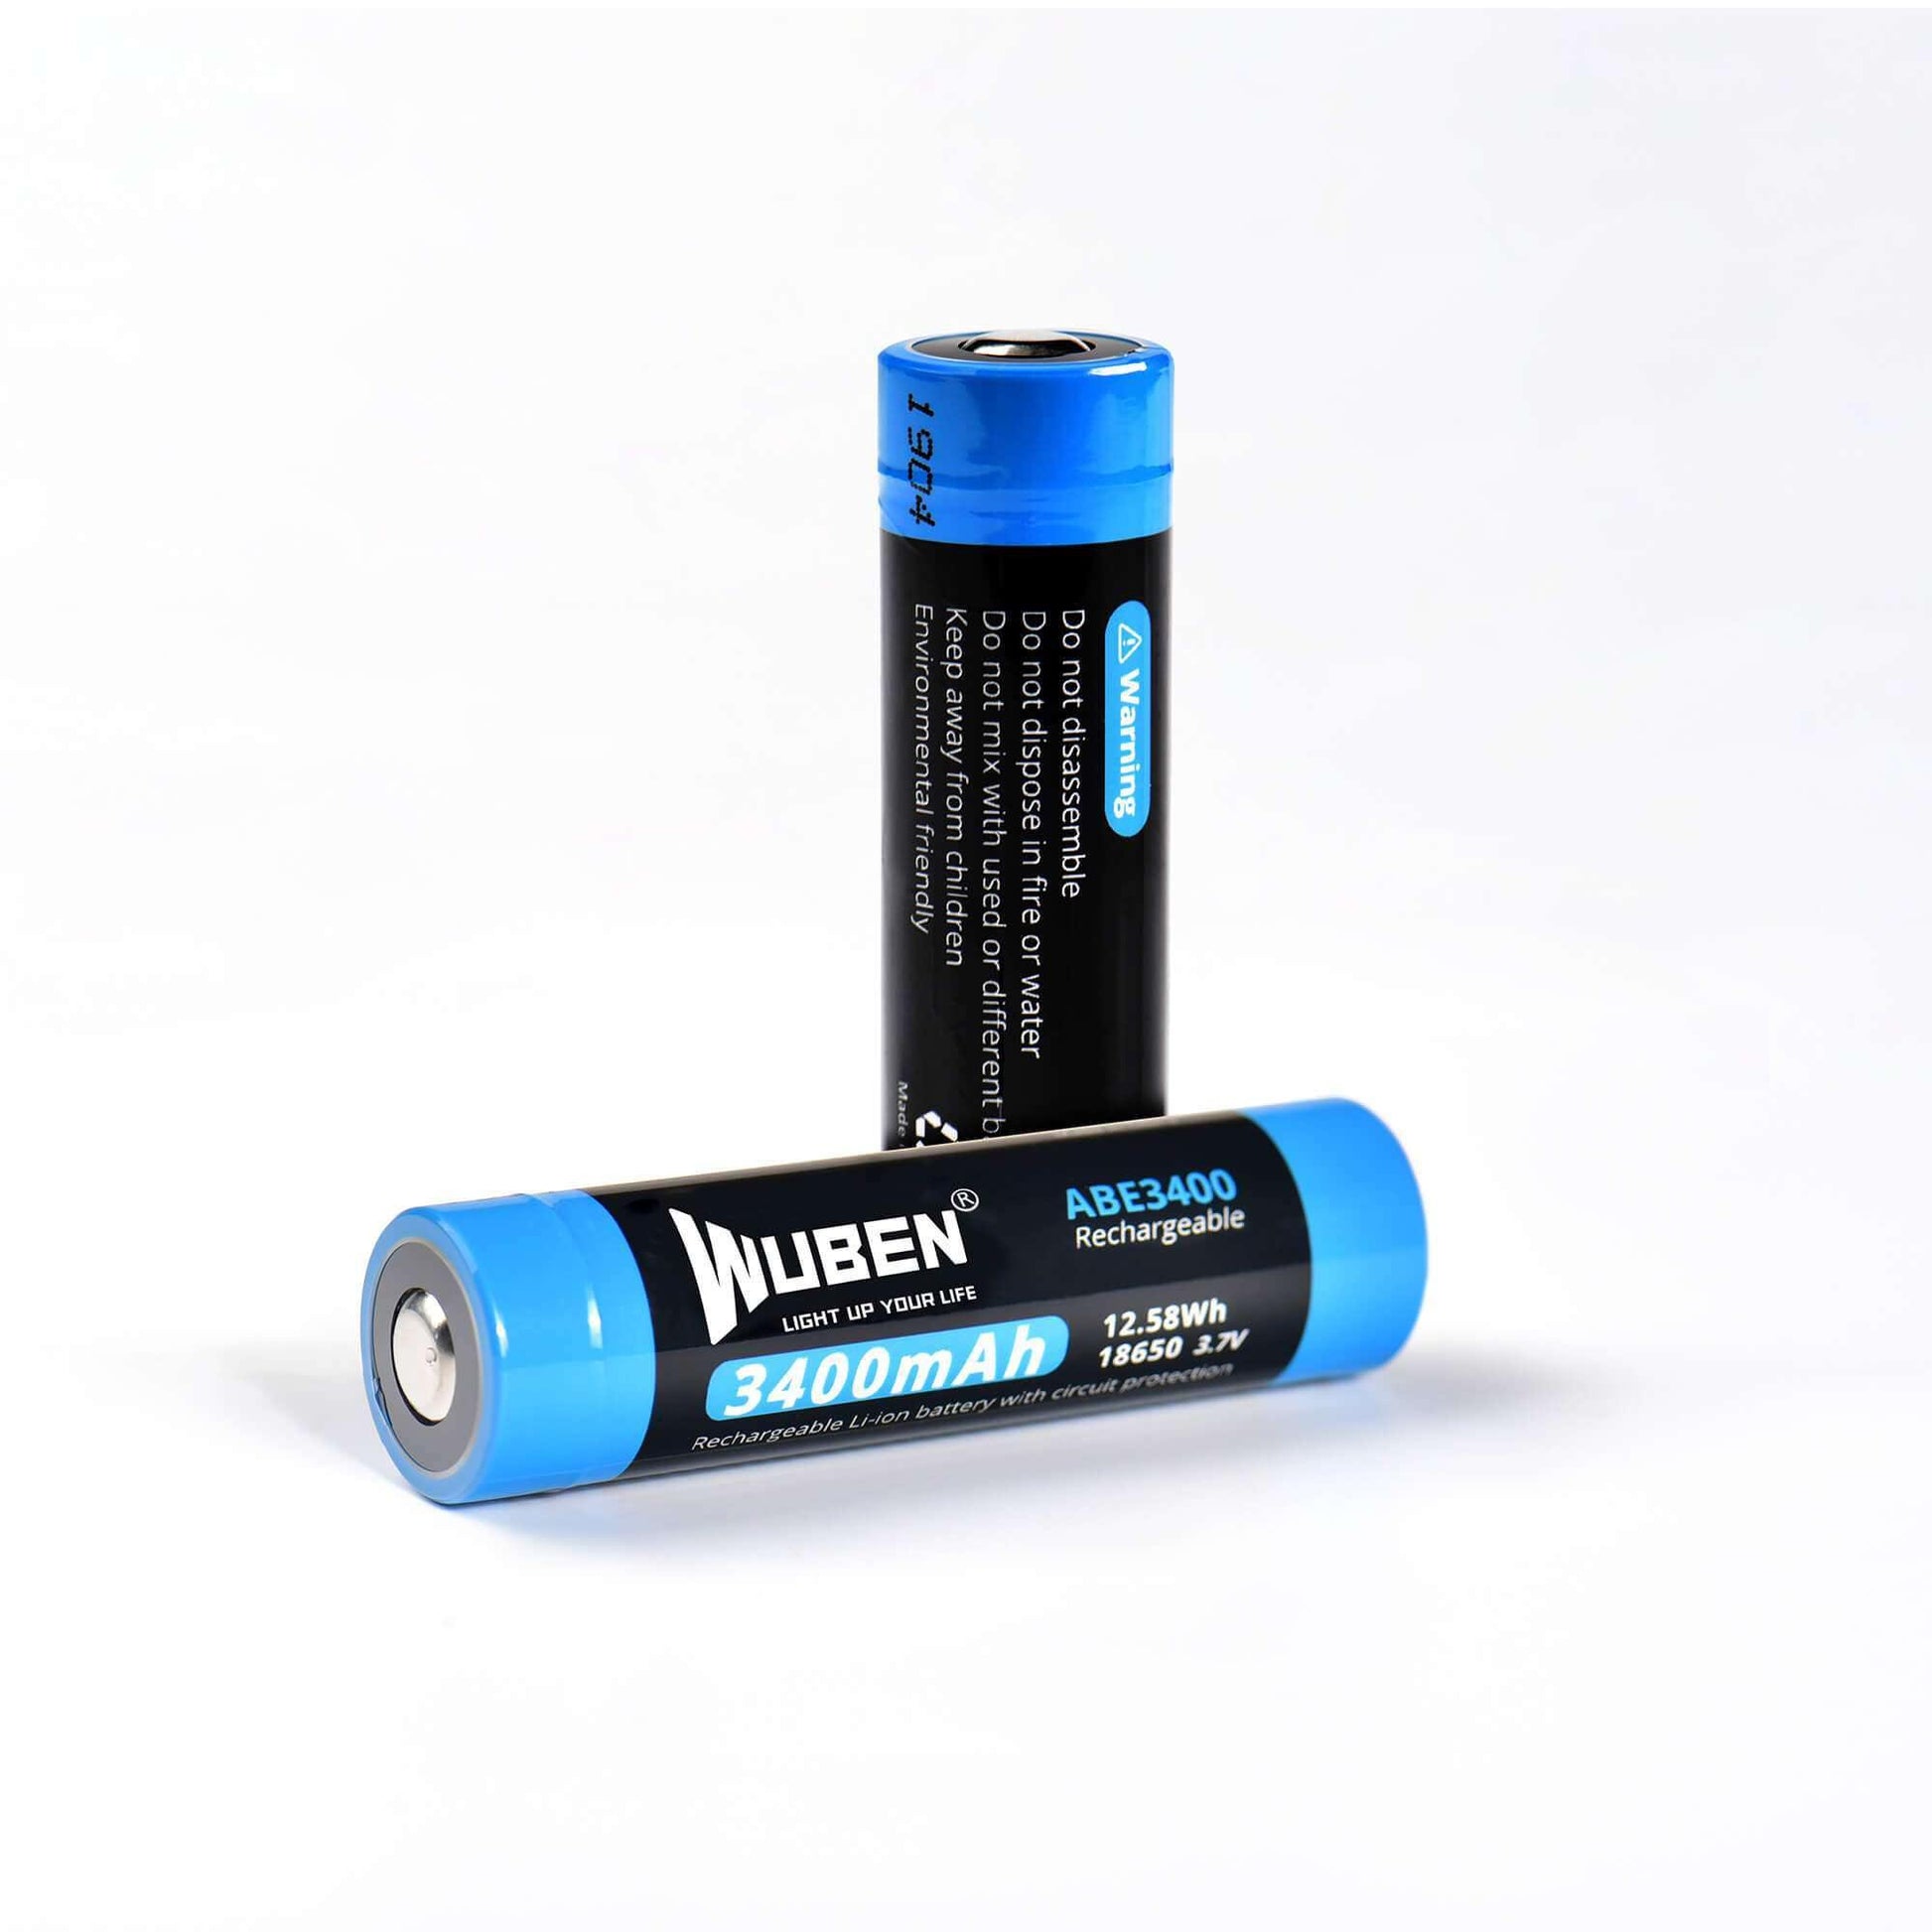 ABE3400 18650 3400mAh rechargeable Protected lithium battery - WUBEN